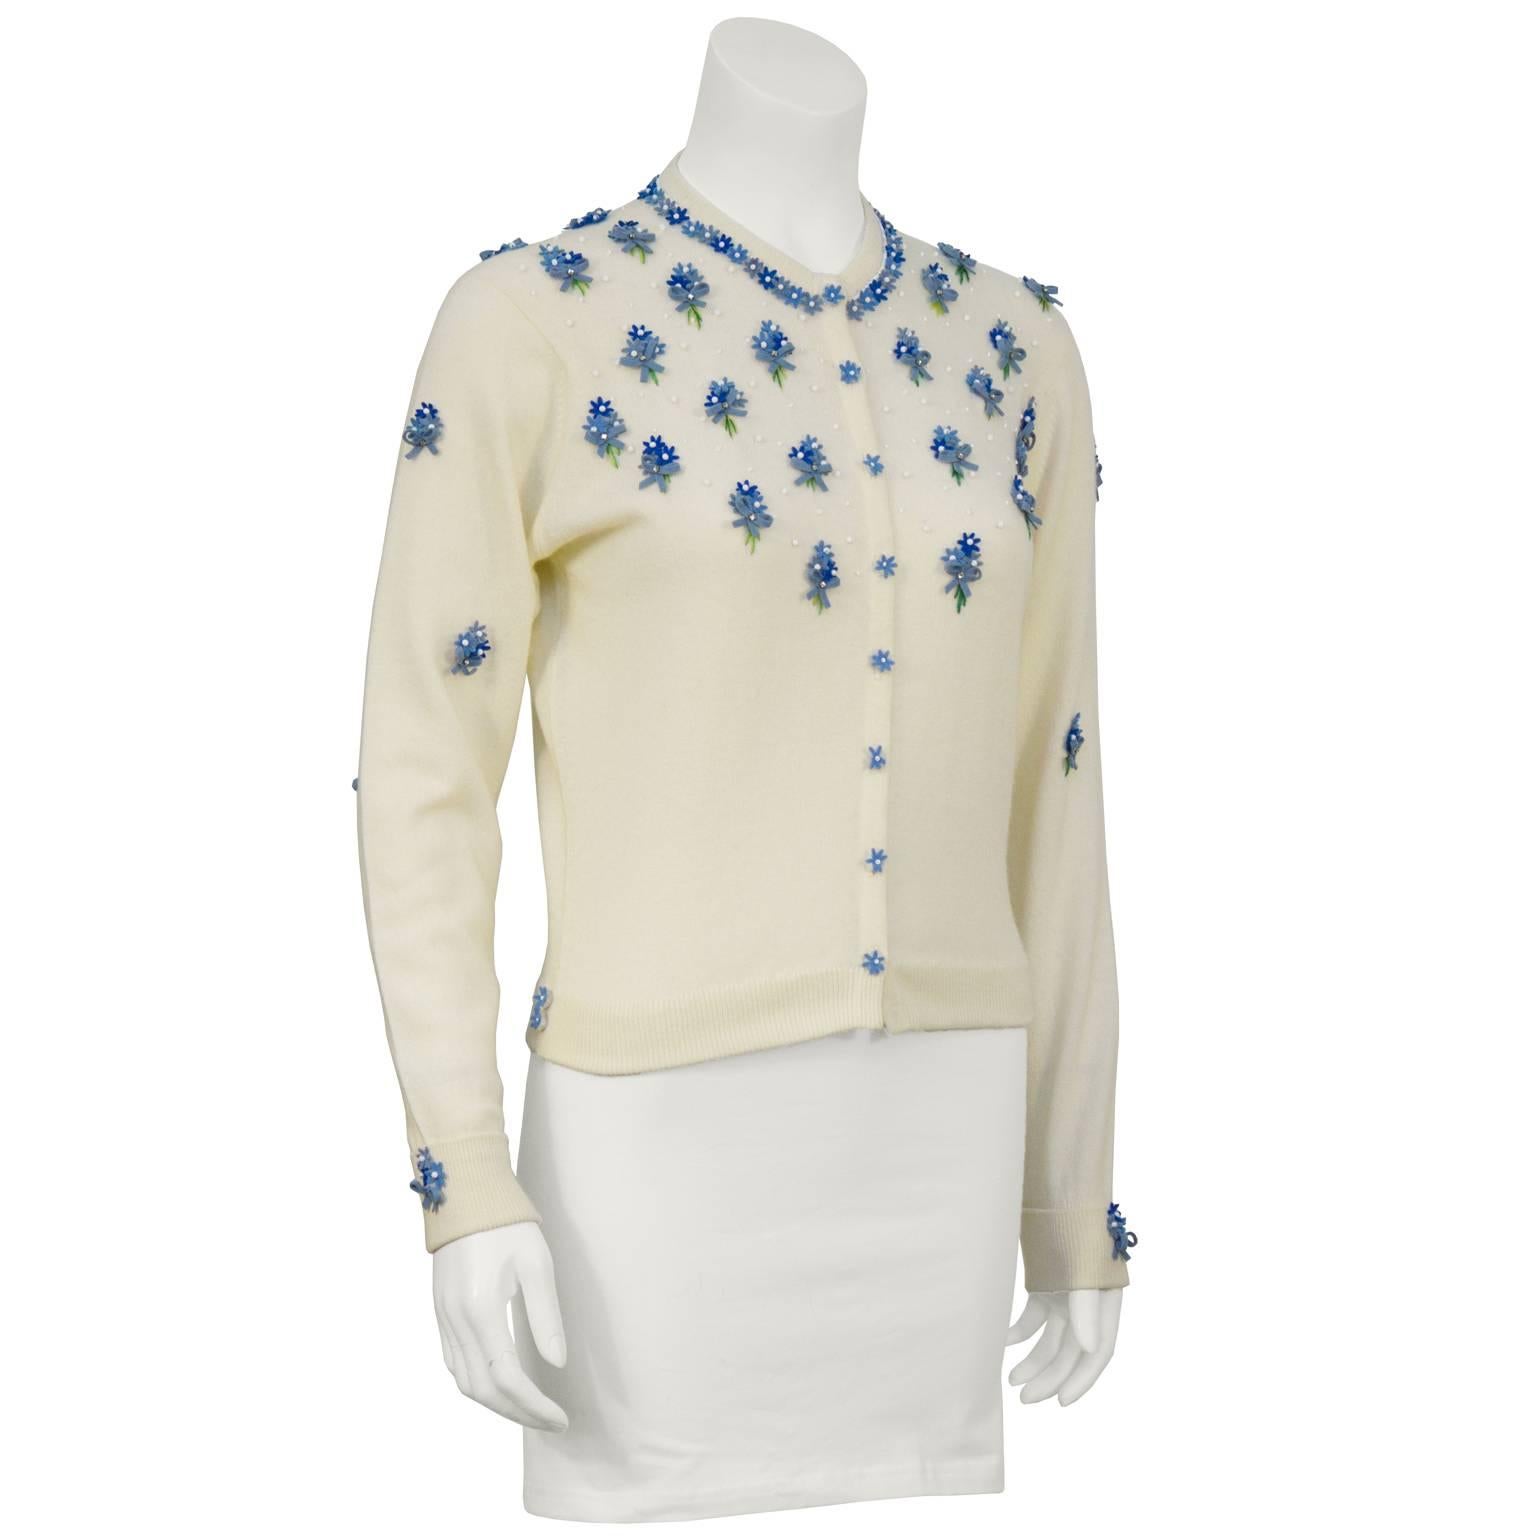 Pristine 1950's Pringle of Scotland 100% cashmere cardigan with hand-sewn white seed beads. Tri-colored blue felt floral appliqué bouquets around collar, sleeves, and on buttons. Perfect unworn condition. Fits like a US 4.
